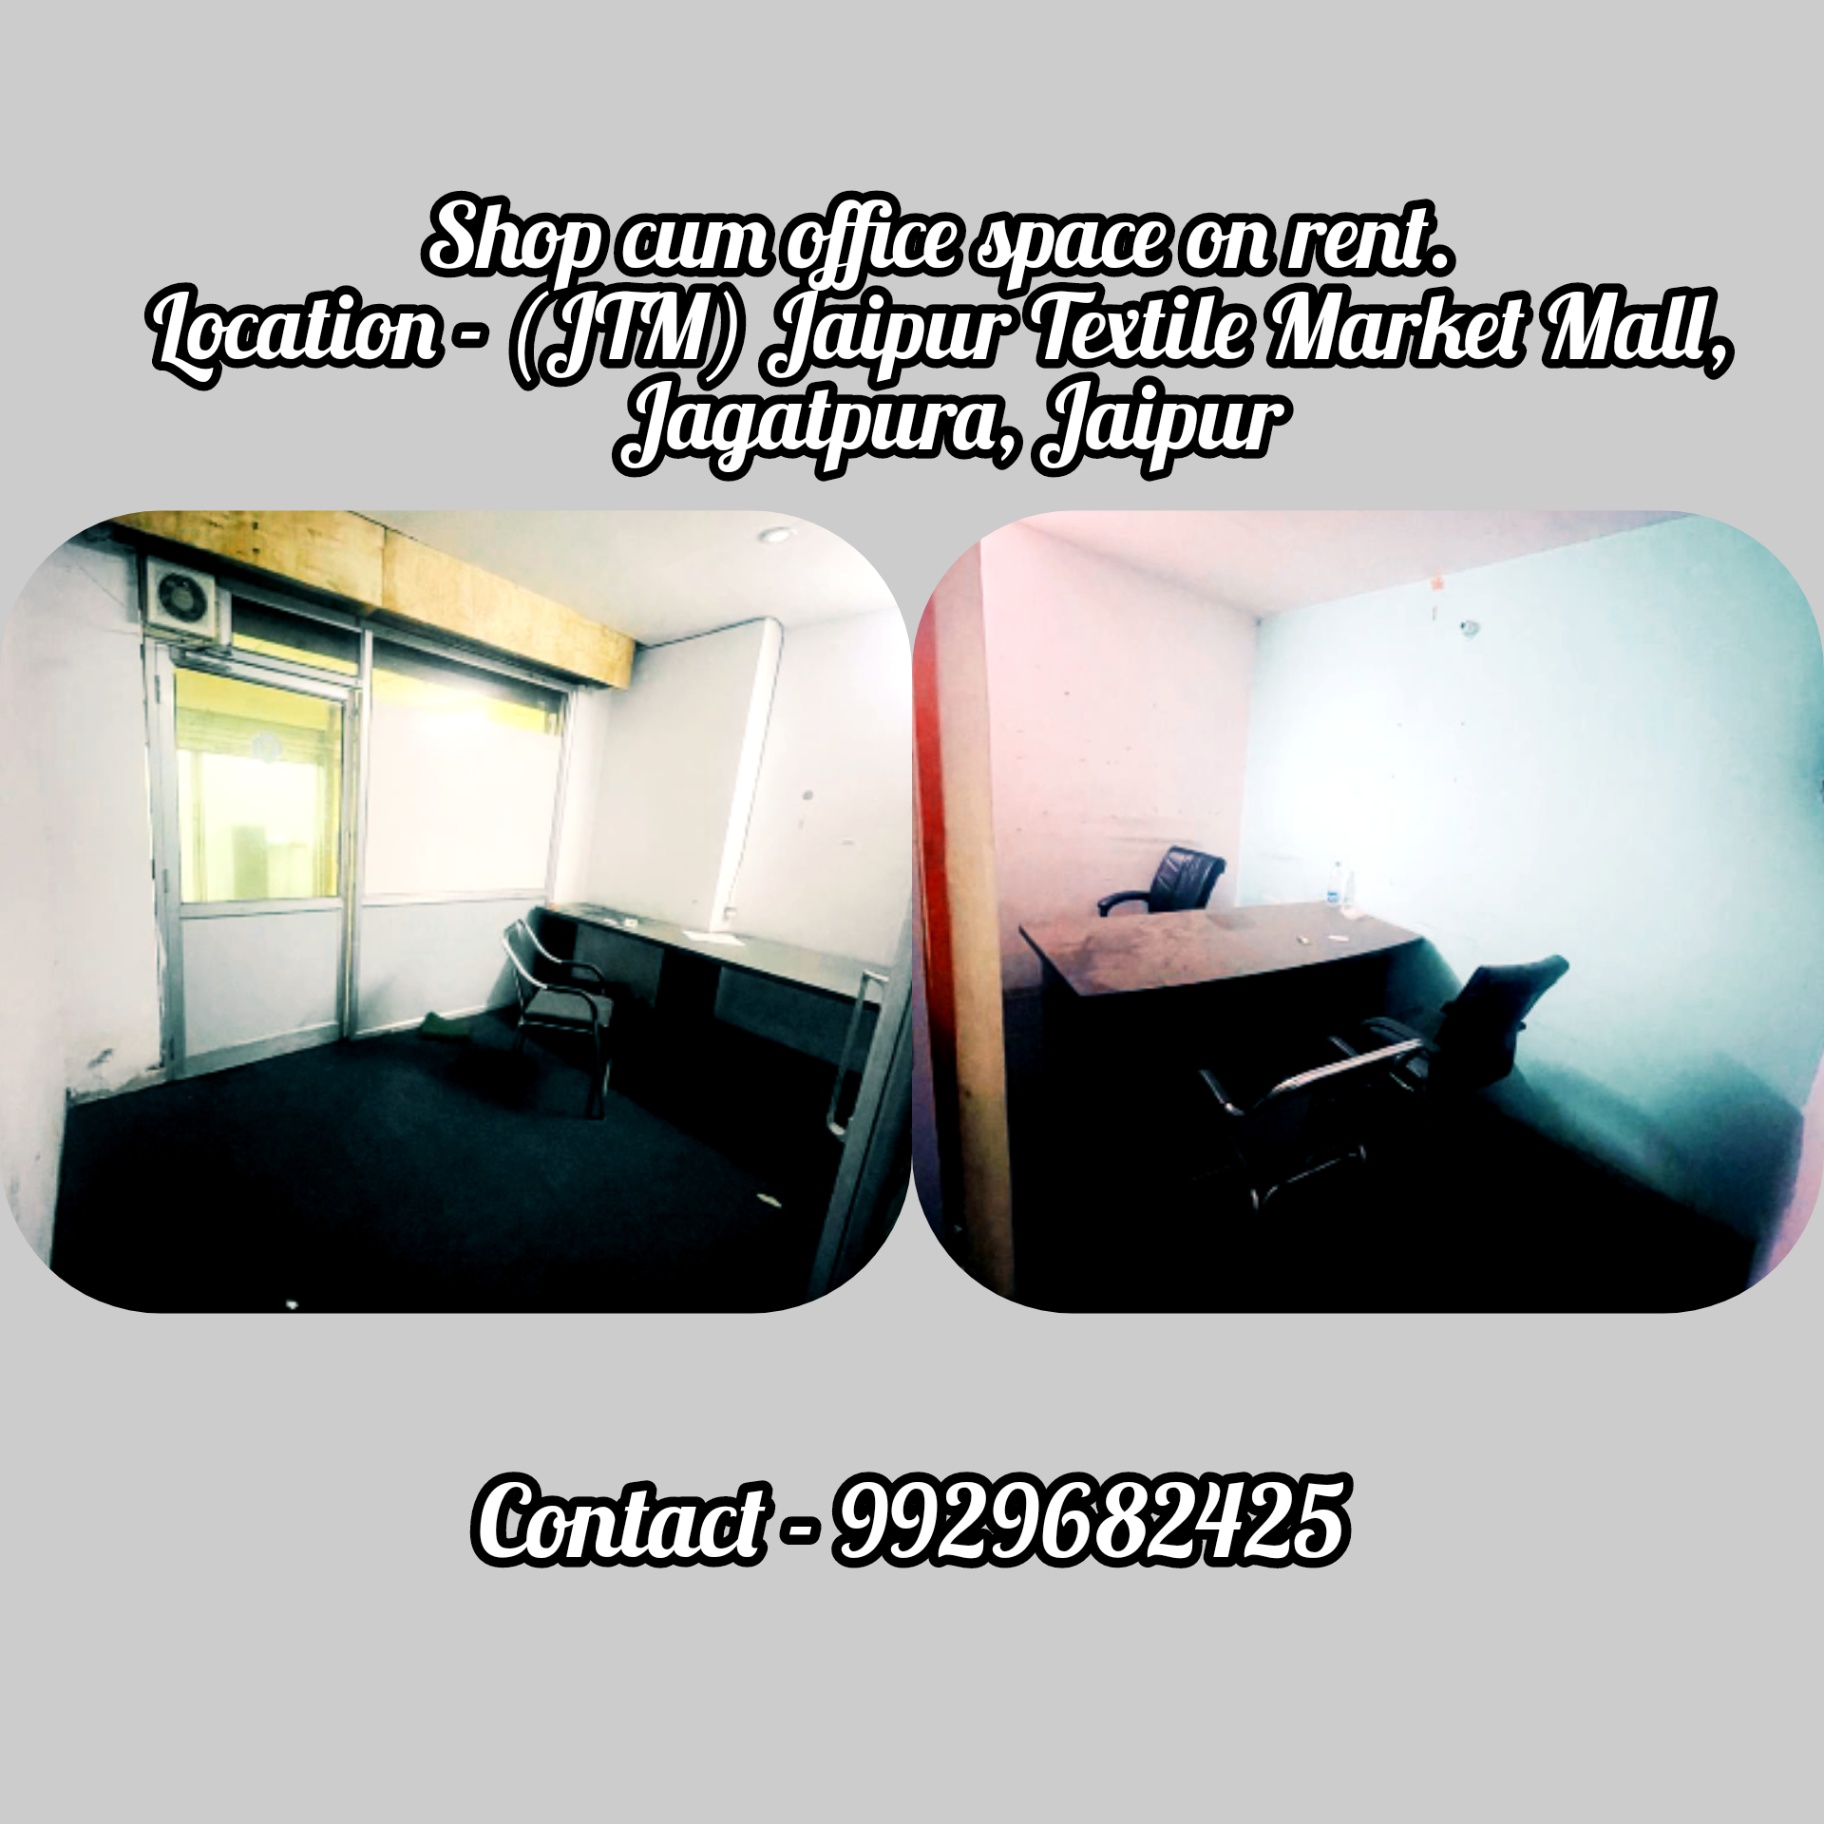 Sell Office/ Shop, 0 sq ft carpet area, Furnished for sale